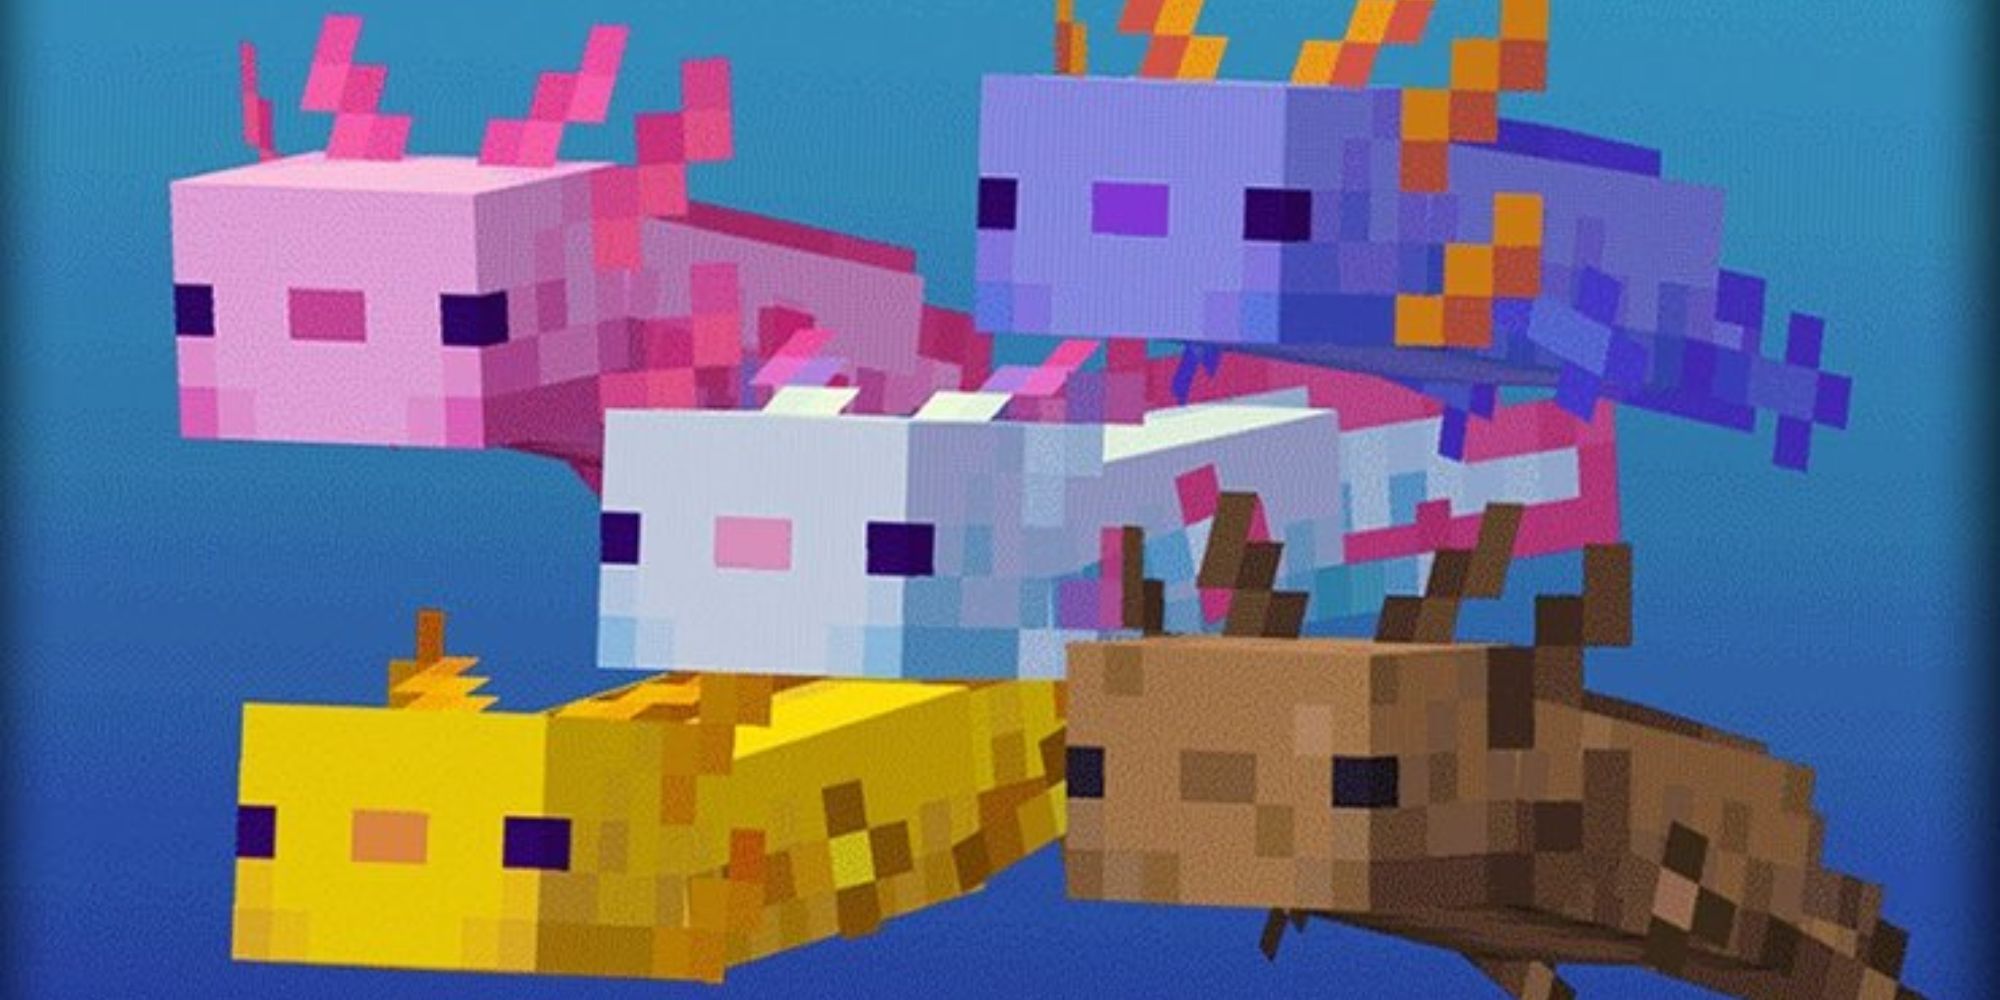 Minecraft 5 Axolotls showing all colors next to each other